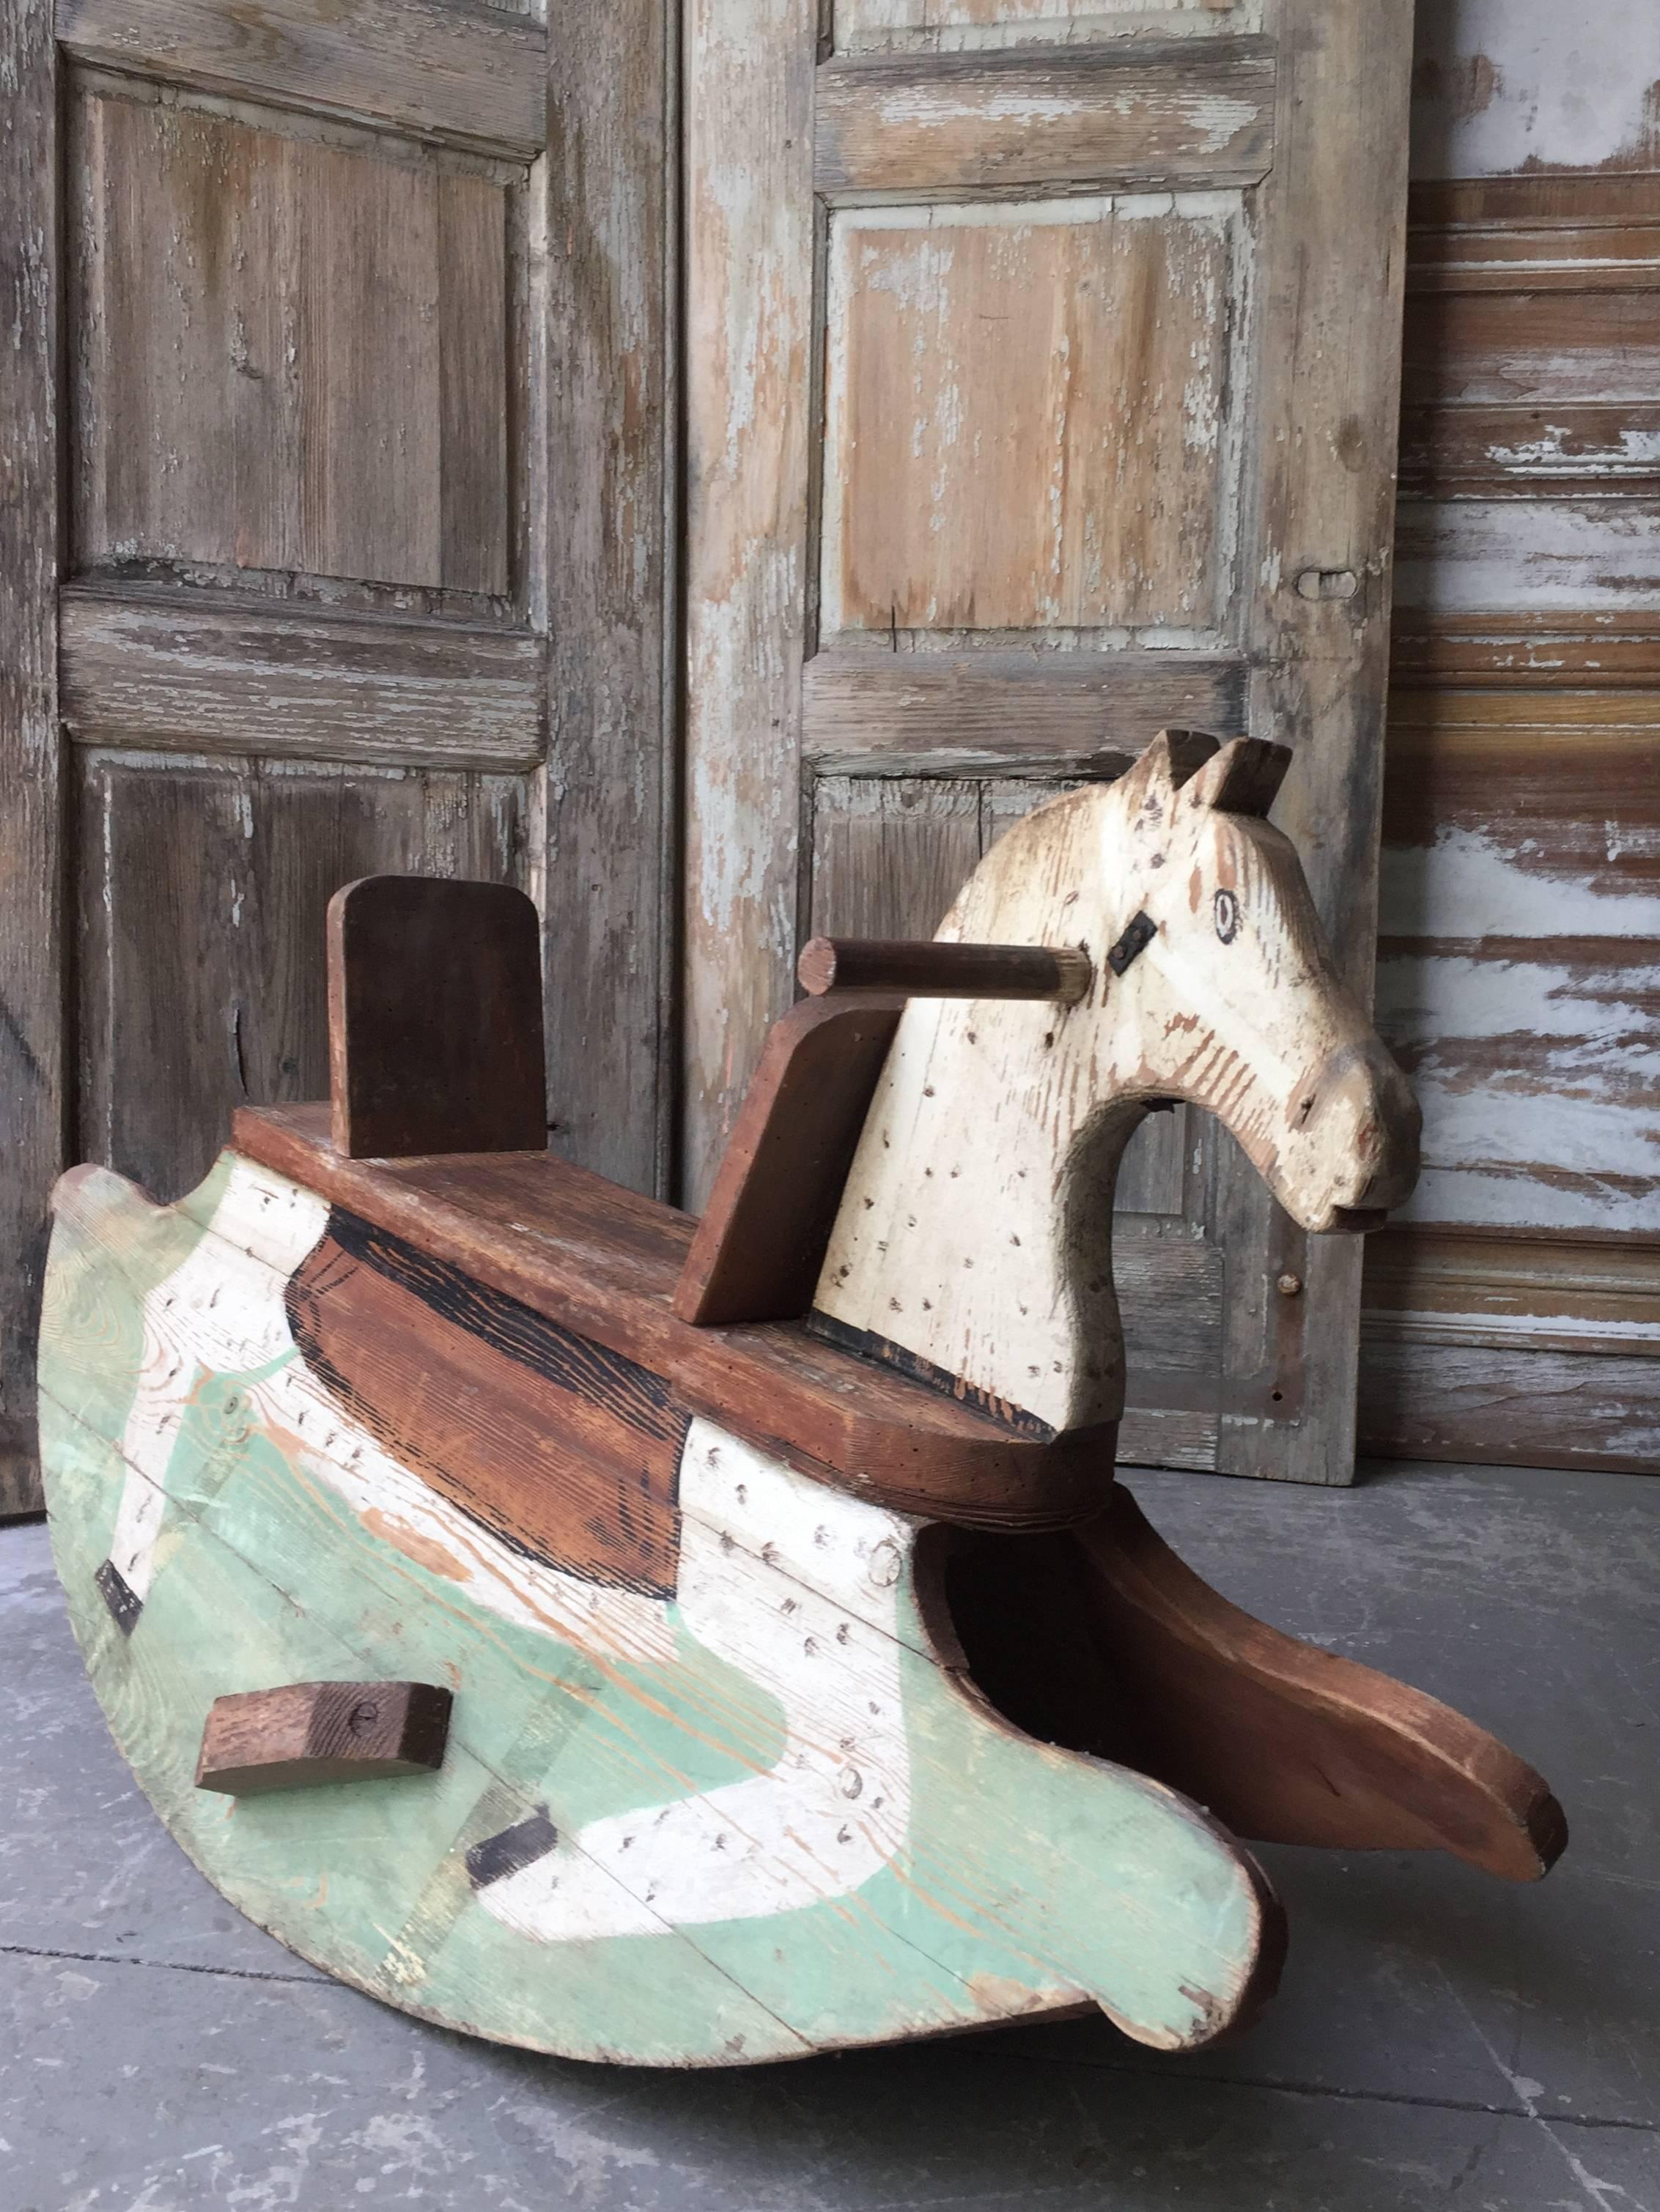 A charming handmade wooden toy horse rocker,
Sweden, circa 1900.

Here are few examples surprising pieces and objects, authentic, decorative and rare items that you will only see in our gallery.